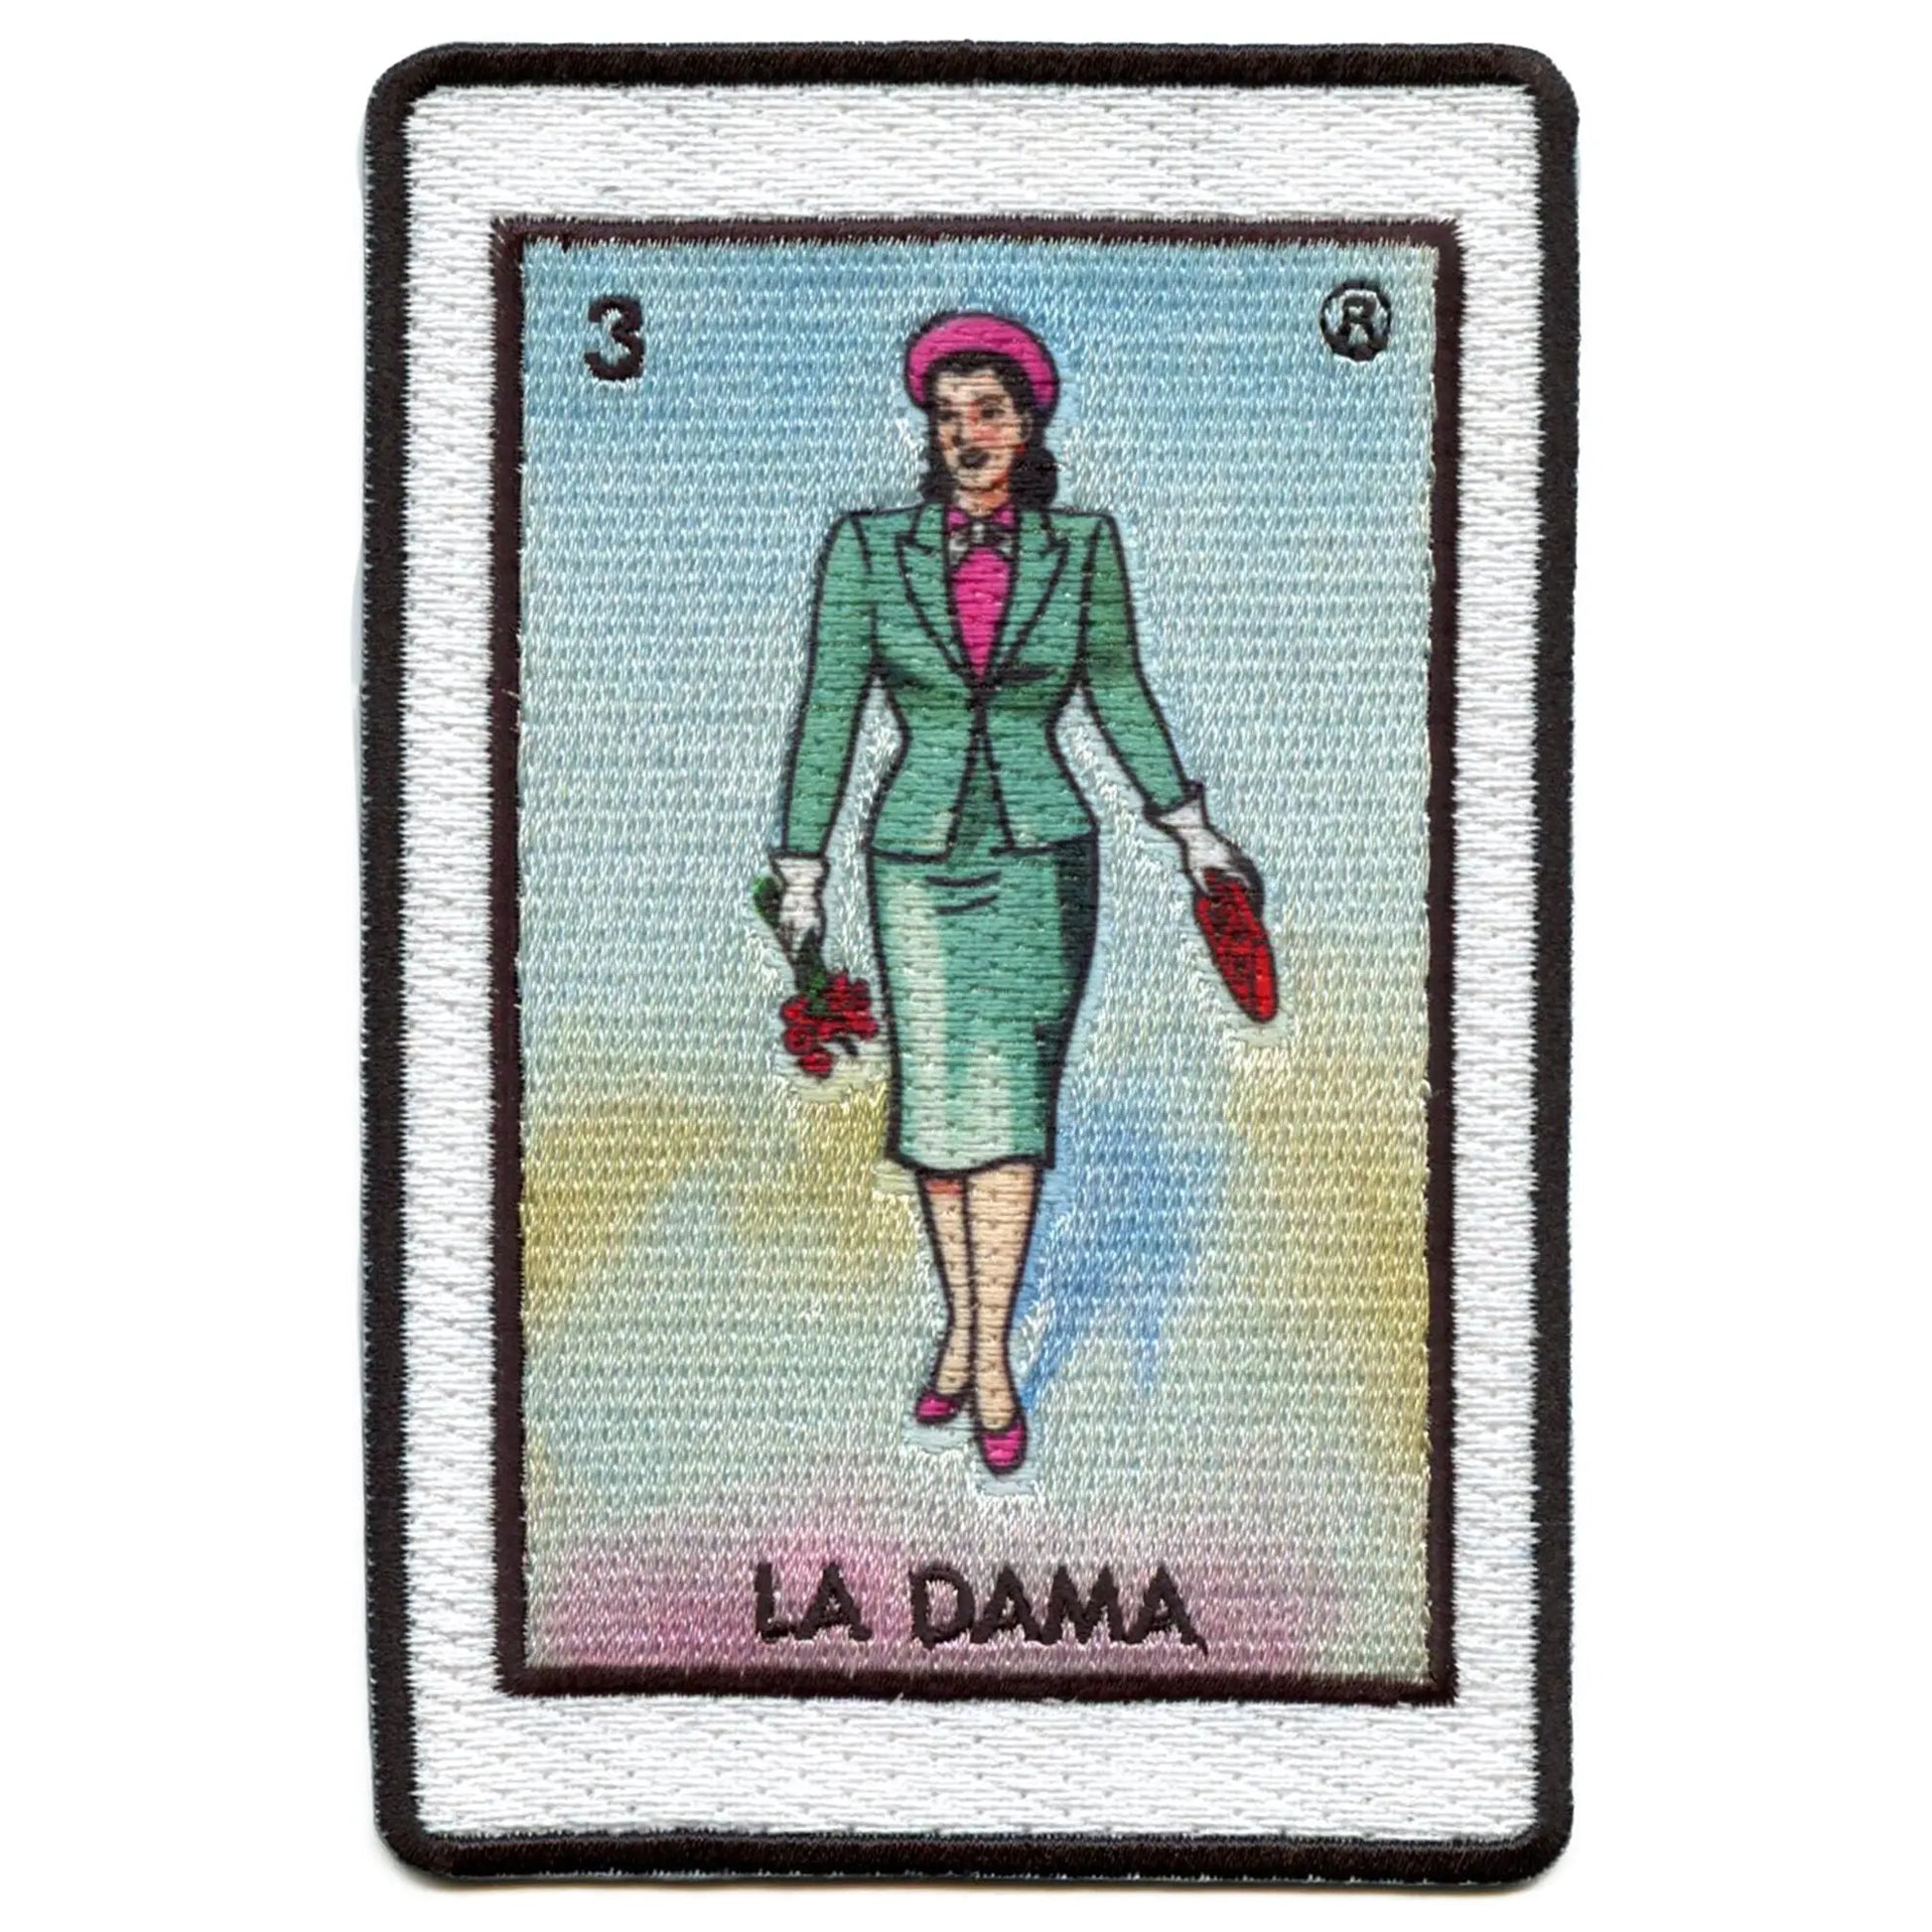 La Dama 3 Patch Mexican Loteria Card Sublimated Embroidery Iron On